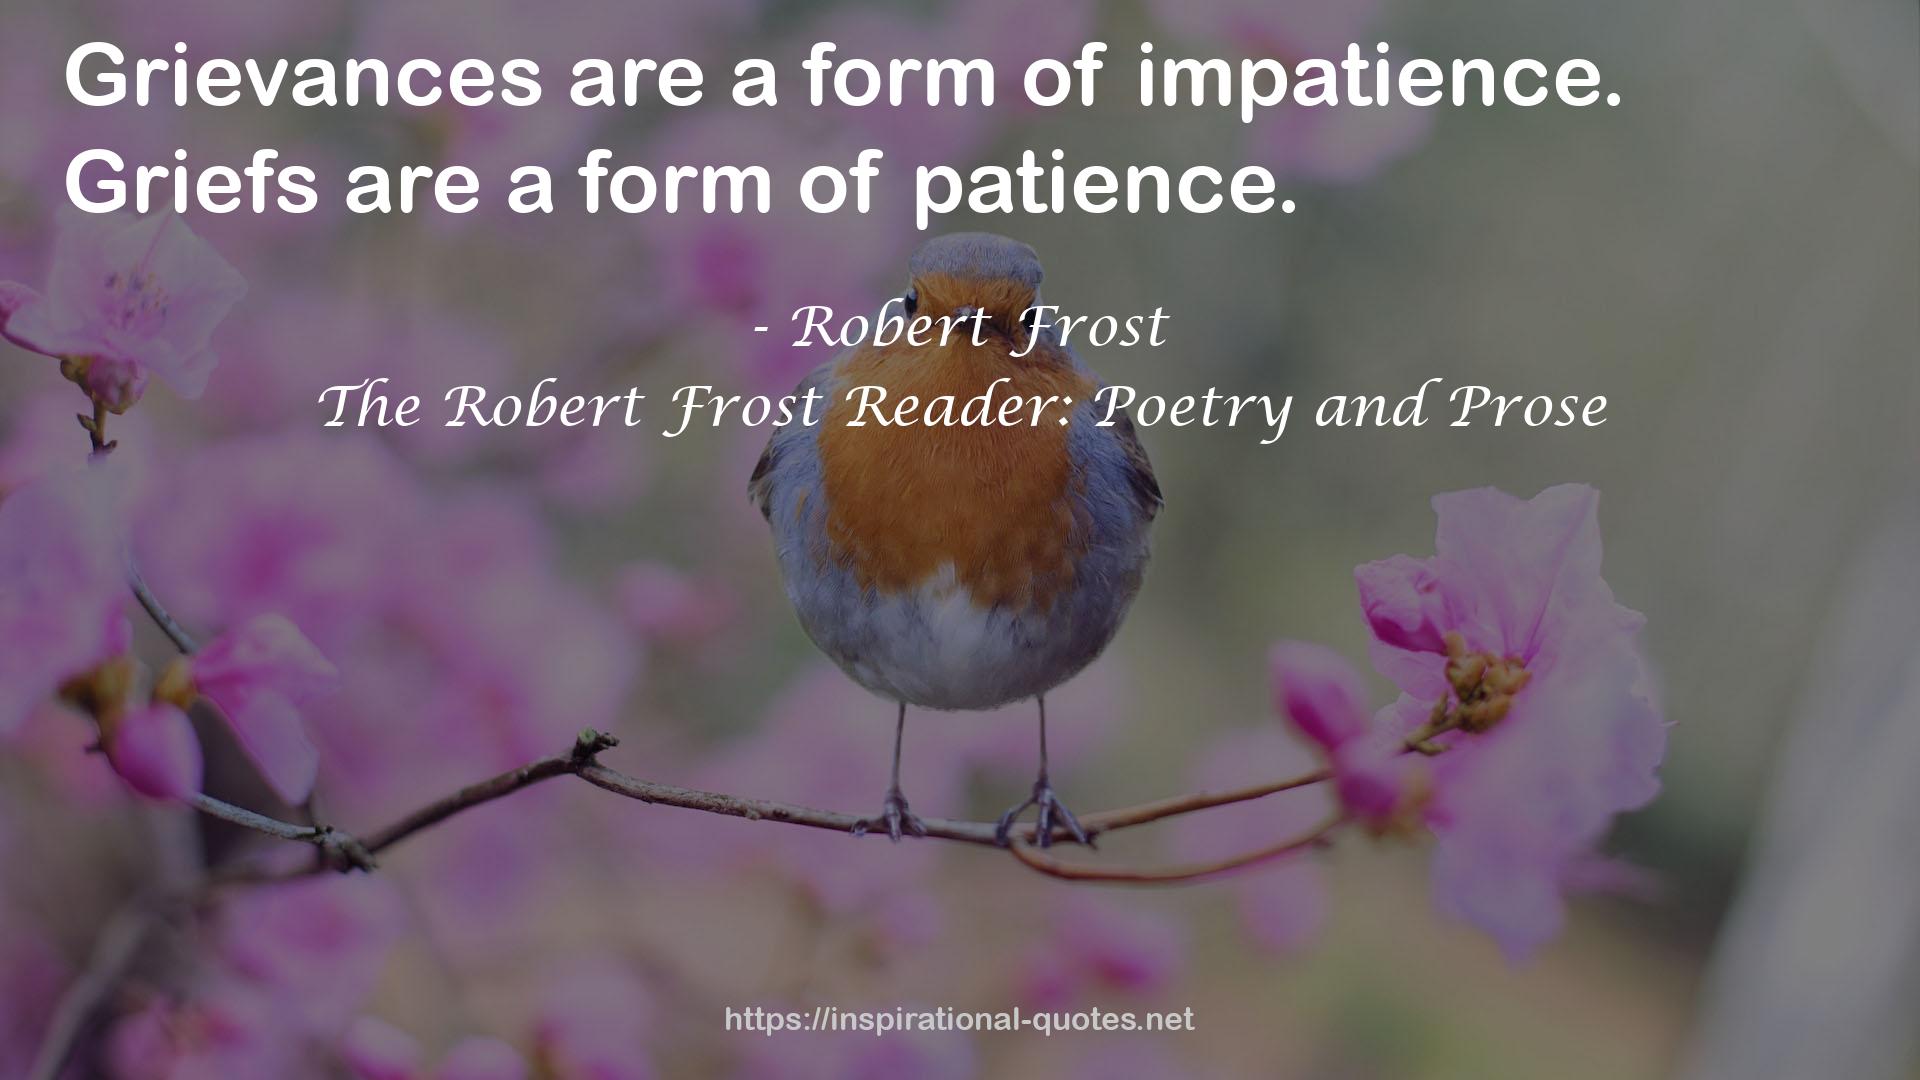 The Robert Frost Reader: Poetry and Prose QUOTES